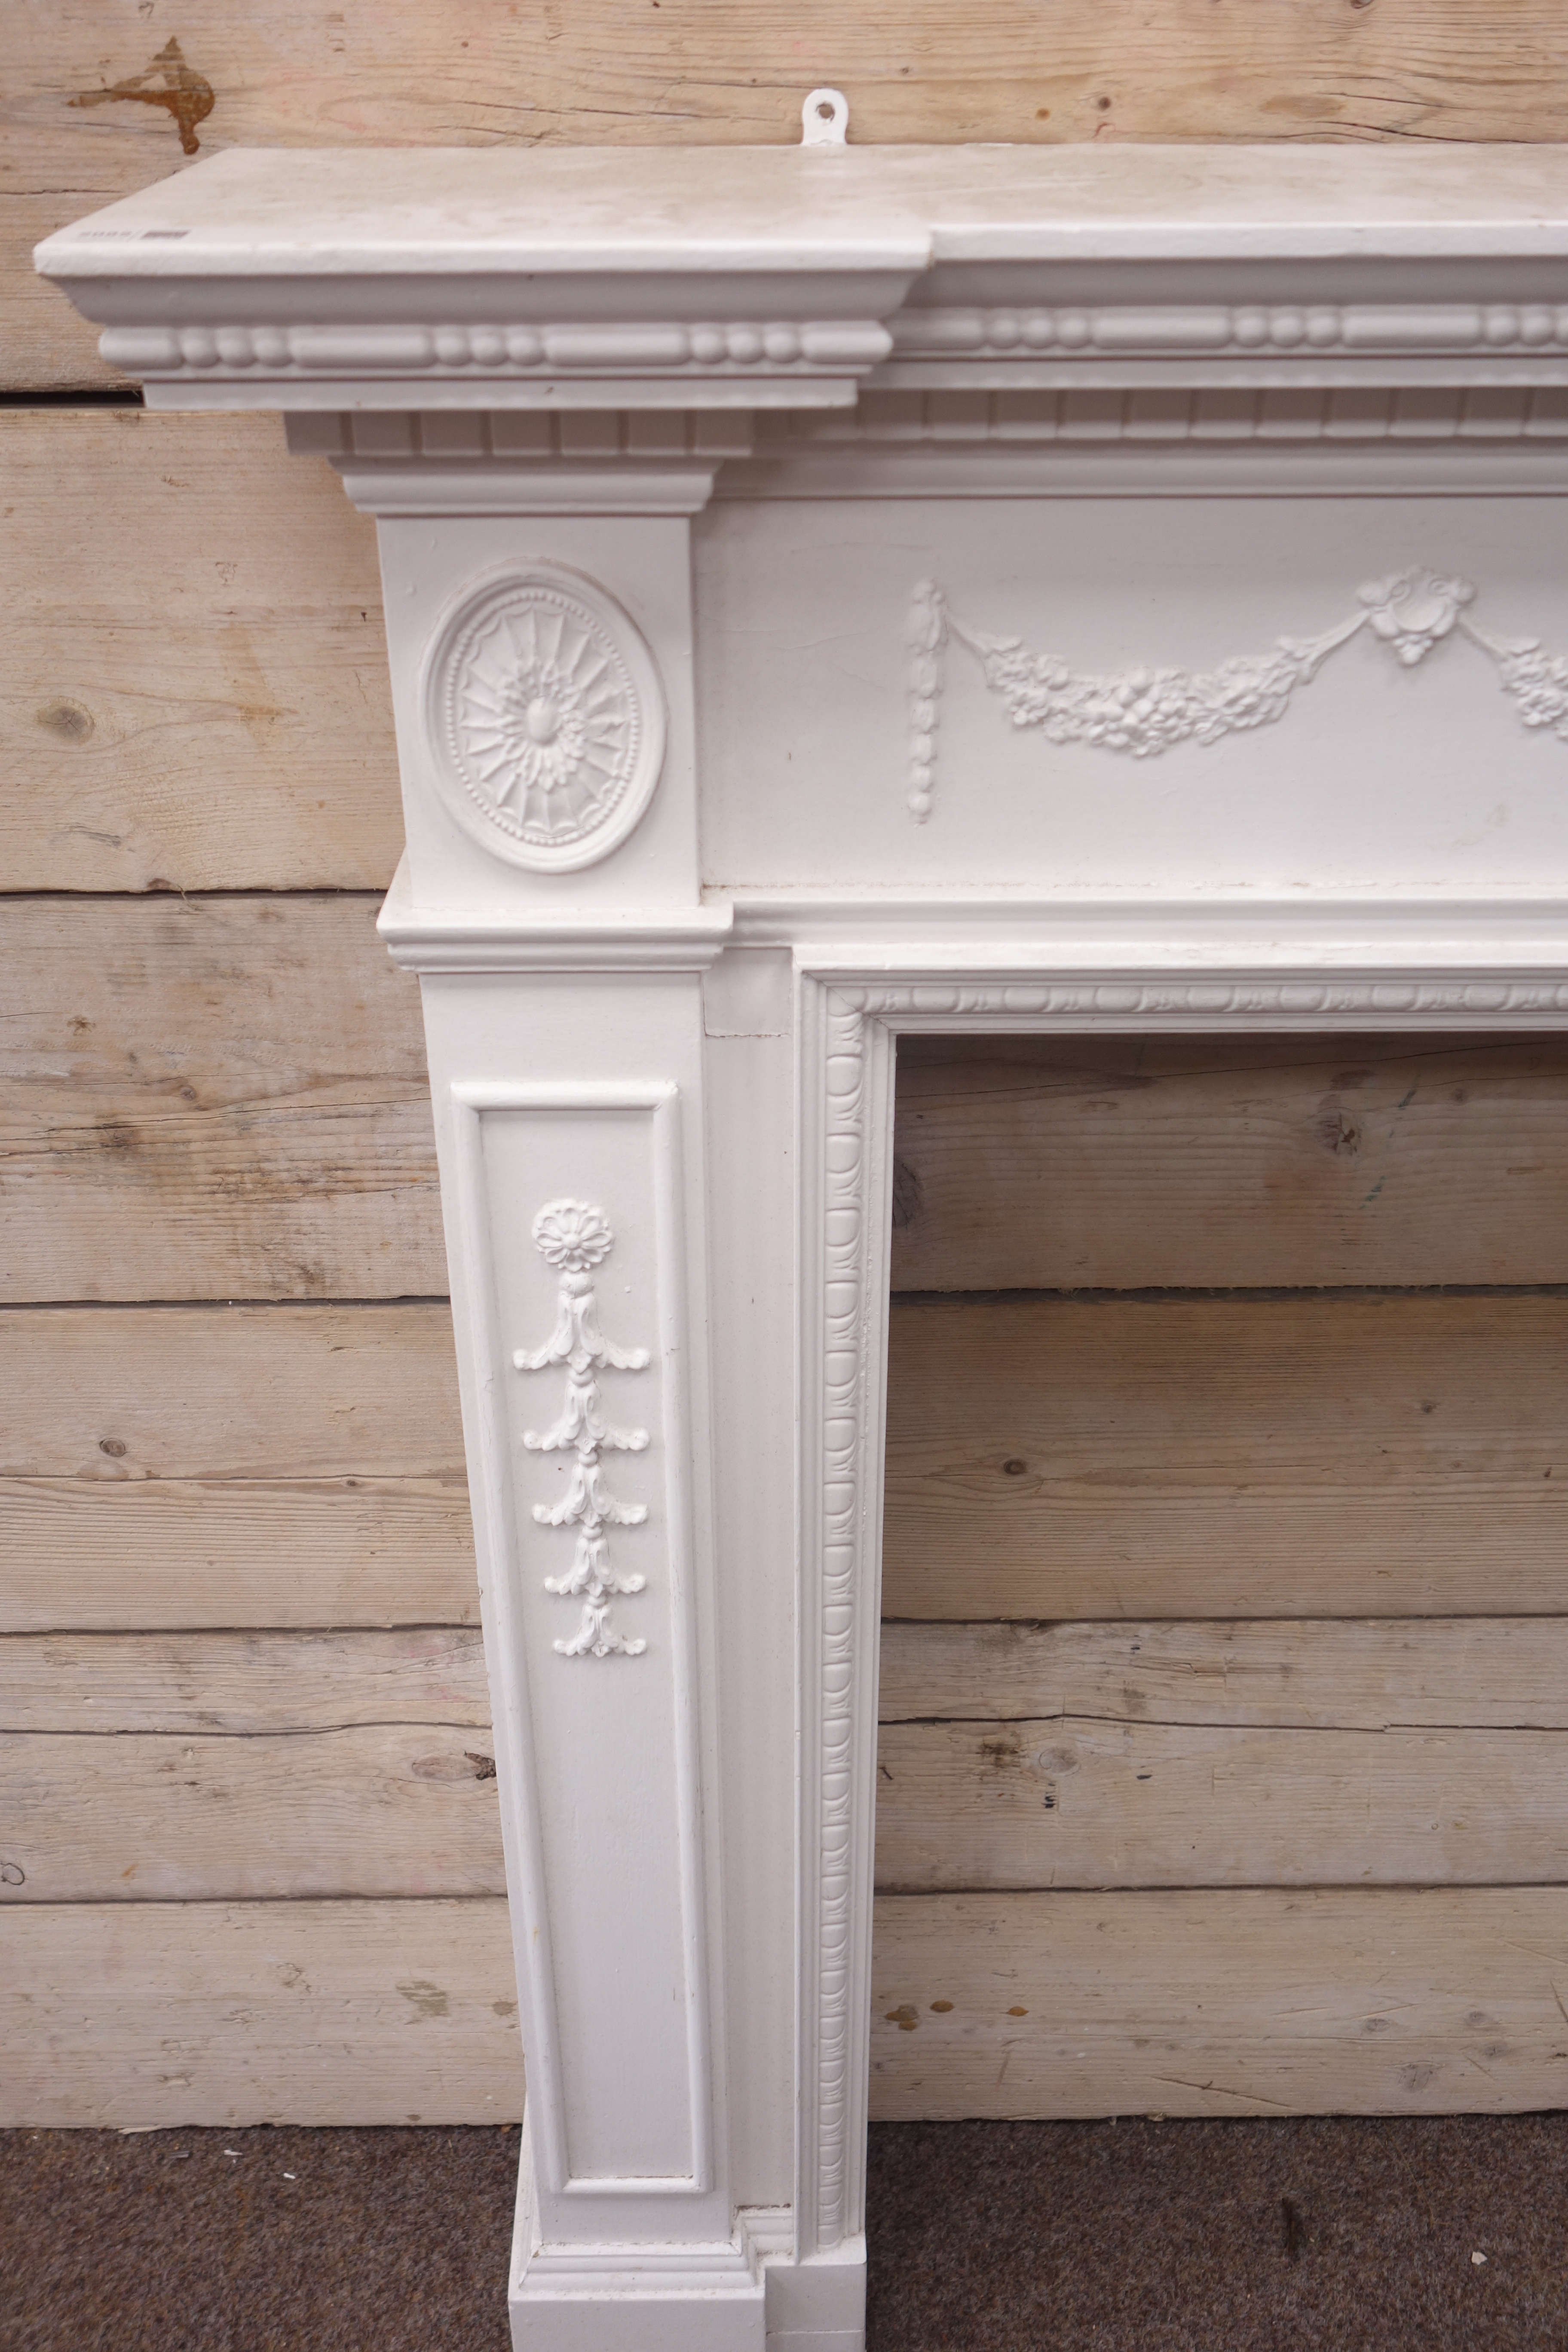 Large 20th century Adams style reverse breakfront fire surround, white painted wood, - Image 2 of 2